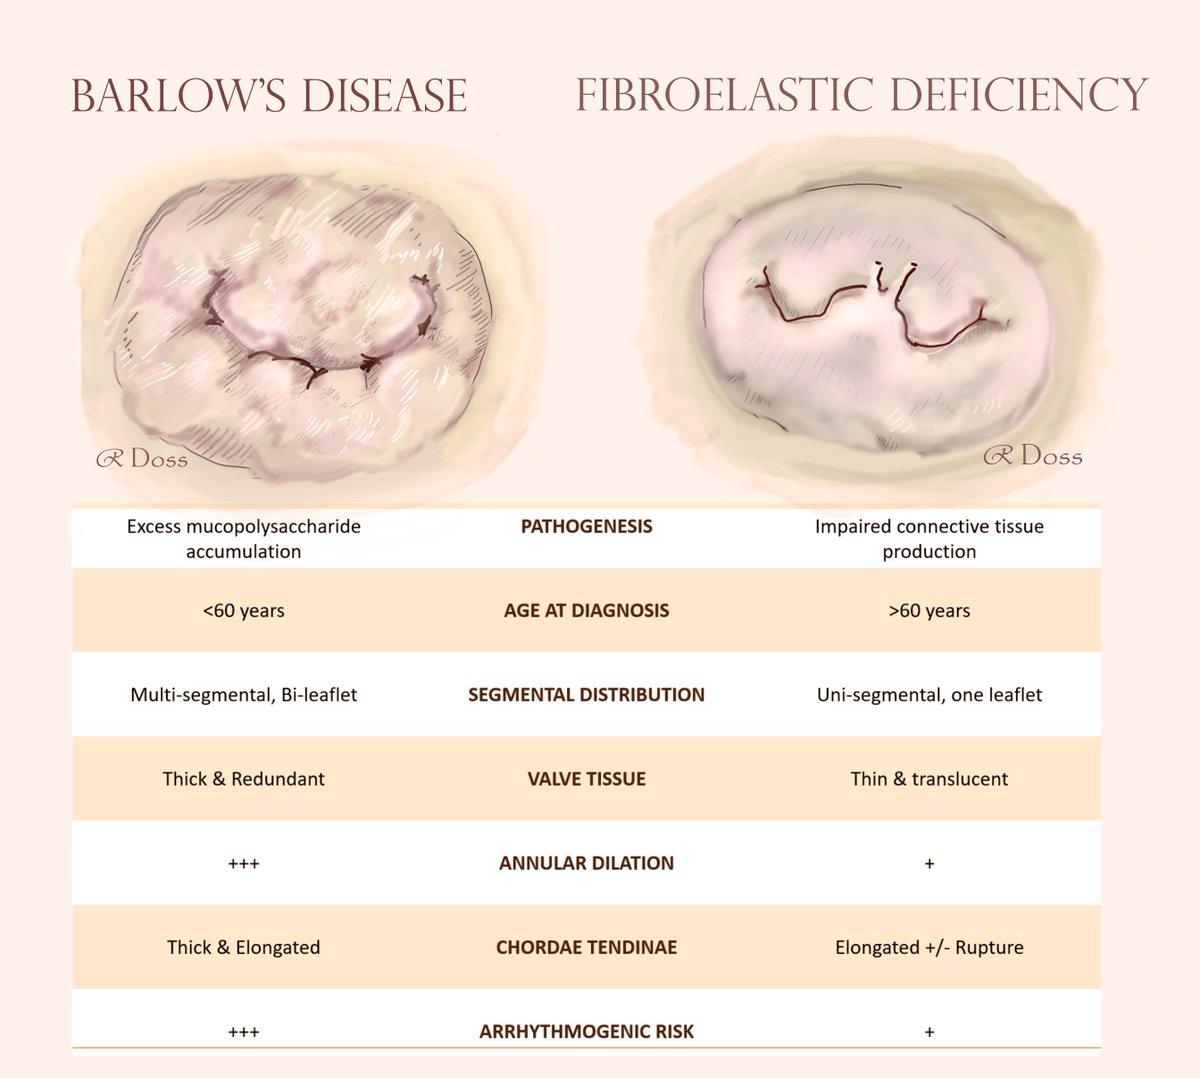 4/19 There are predominantly 2 pathological forms of MVP: 🔶 Barlow’s disease: develops in younger age, diffuse bi-leaflet disease with elongated chordae 🔶Fibroelastic deficiency: develops in older age, usually affecting a single cusp with chordal rupture